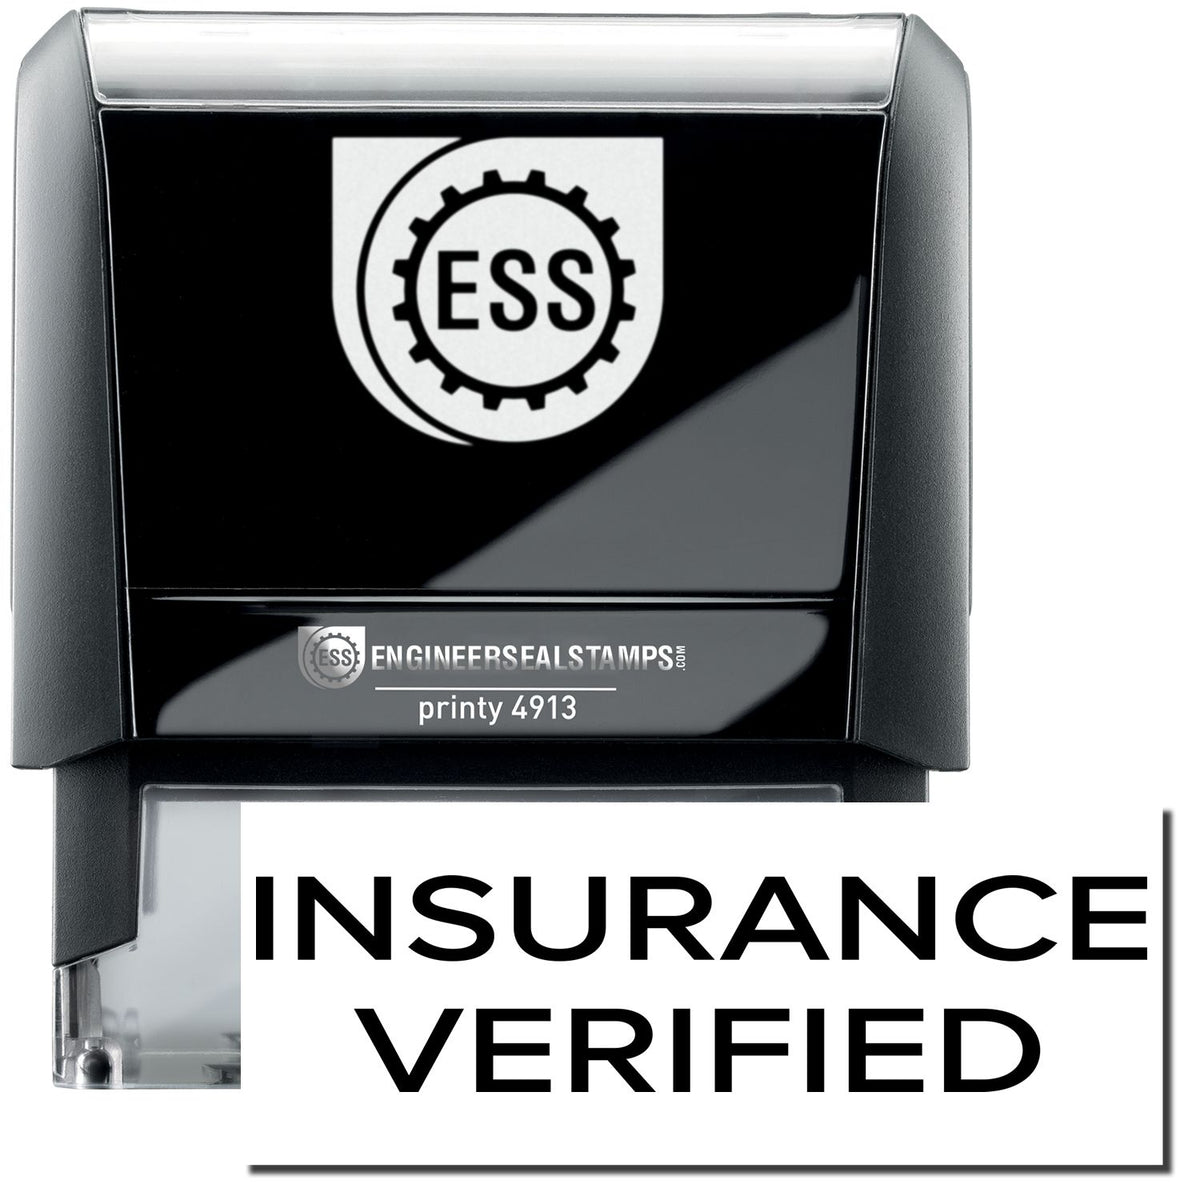 A self-inking stamp with a stamped image showing how the text &quot;INSURANCE VERIFIED&quot; in a large narrow font is displayed by it after stamping.